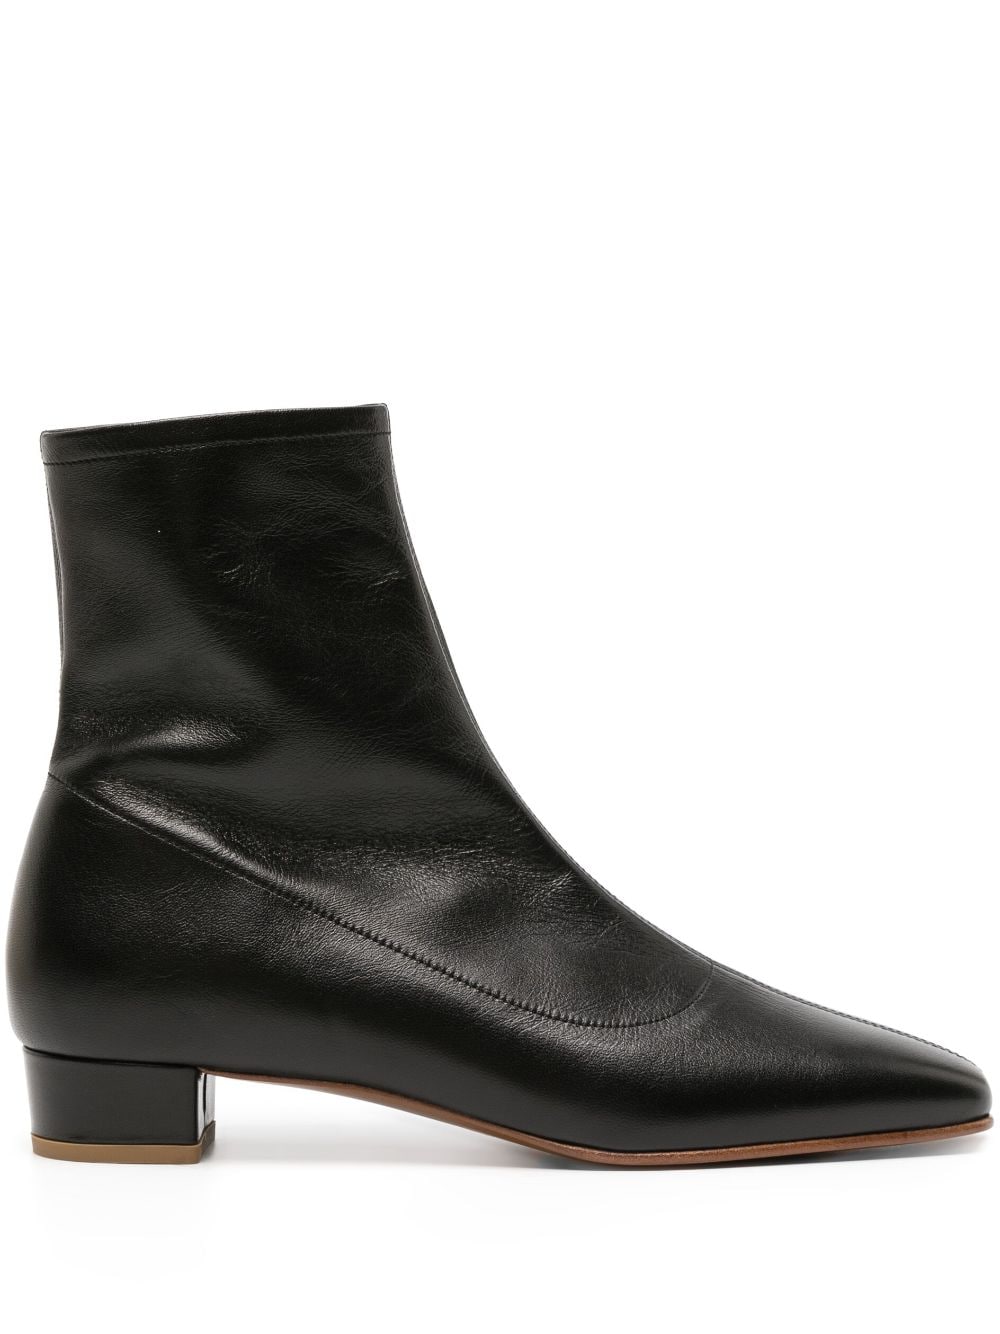 BY FAR Este 30mm leather ankle boots - Black von BY FAR